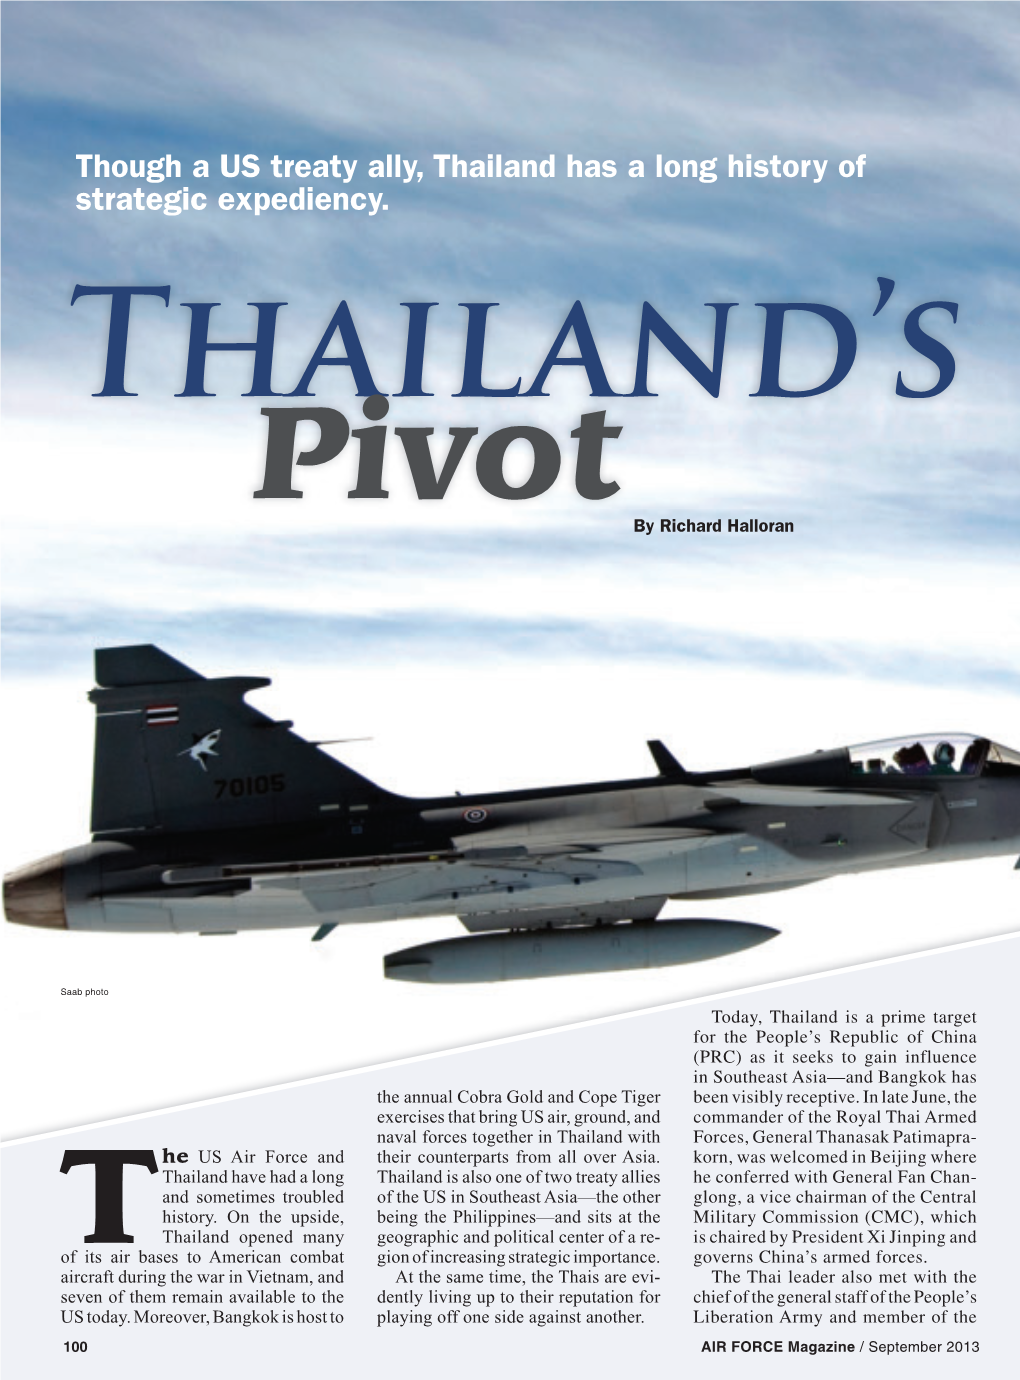 Though a US Treaty Ally, Thailand Has a Long History of Strategic Expediency. Thailand’S Pivot by Richard Halloran